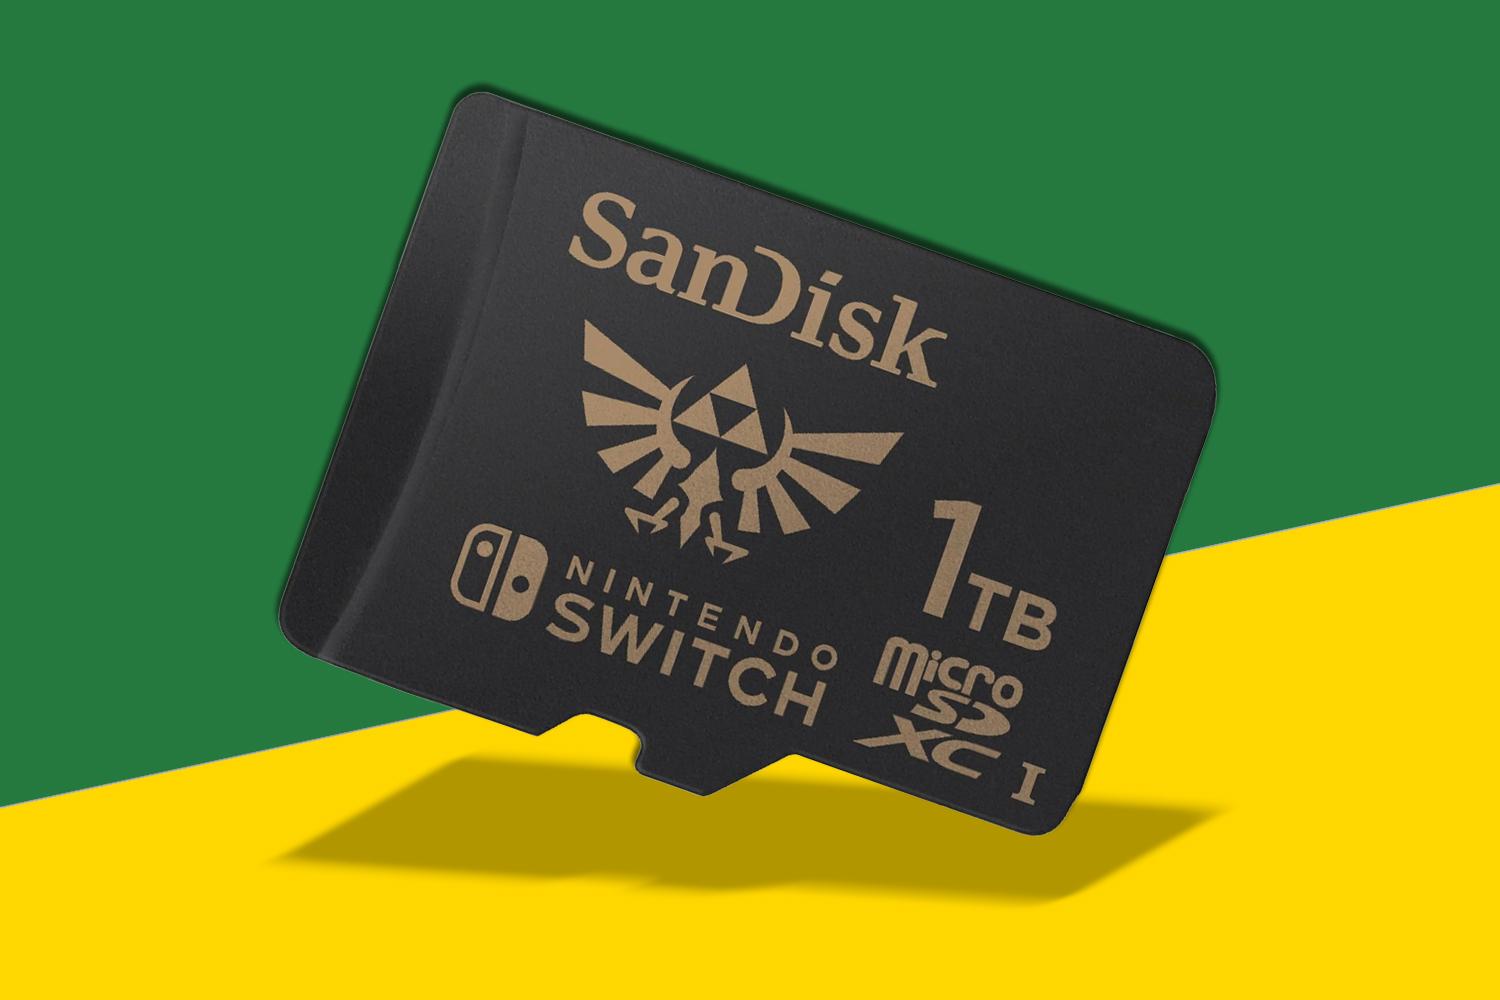 SanDisk microSDXC Card for Nintendo Switch With Nintendo Points